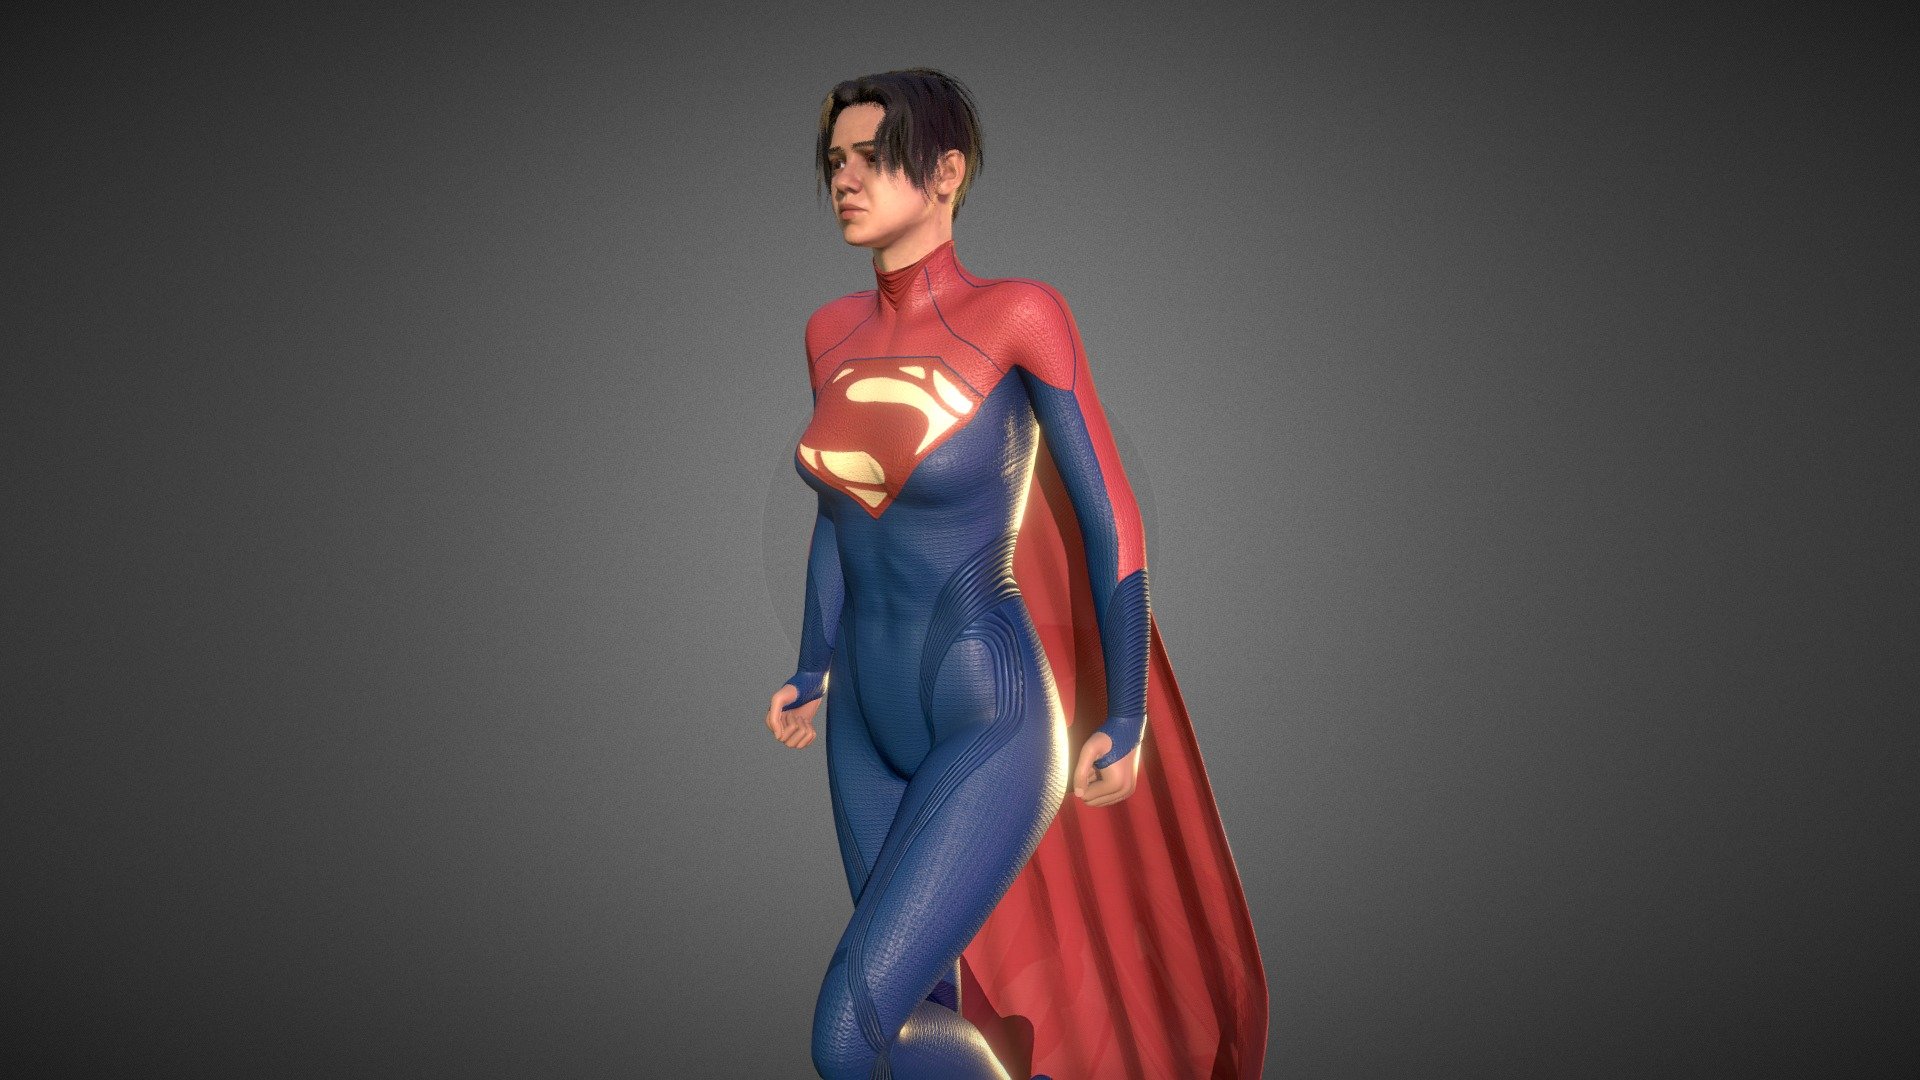 Introducing the stunningly realistic 3D character of Supergirl, brought to life by the incredible actress Sacha Calle from the new Flash movie! This digital masterpiece captures every intricate detail of Supergirl’s iconic costume and features, showcasing her strength and resilience. With impeccable attention to realism and artistry.

Info:
1. Textuer Size 512 - 4k based on detail 
2. 13 mesh all weight painted 
3. 62K quads Mesh 
4. 150+ working Hours 
5. Cape animation done using cloth simulation 
6. Game Ready

additional Files: 
1. Fully face and body rigged character using Blender rigify. 
2. Full Size Textures.

Hope you enjoy it! - SuperGirl - Sasha Calle - The flash movie - Buy Royalty Free 3D model by Sam_Kasrawi 3d model